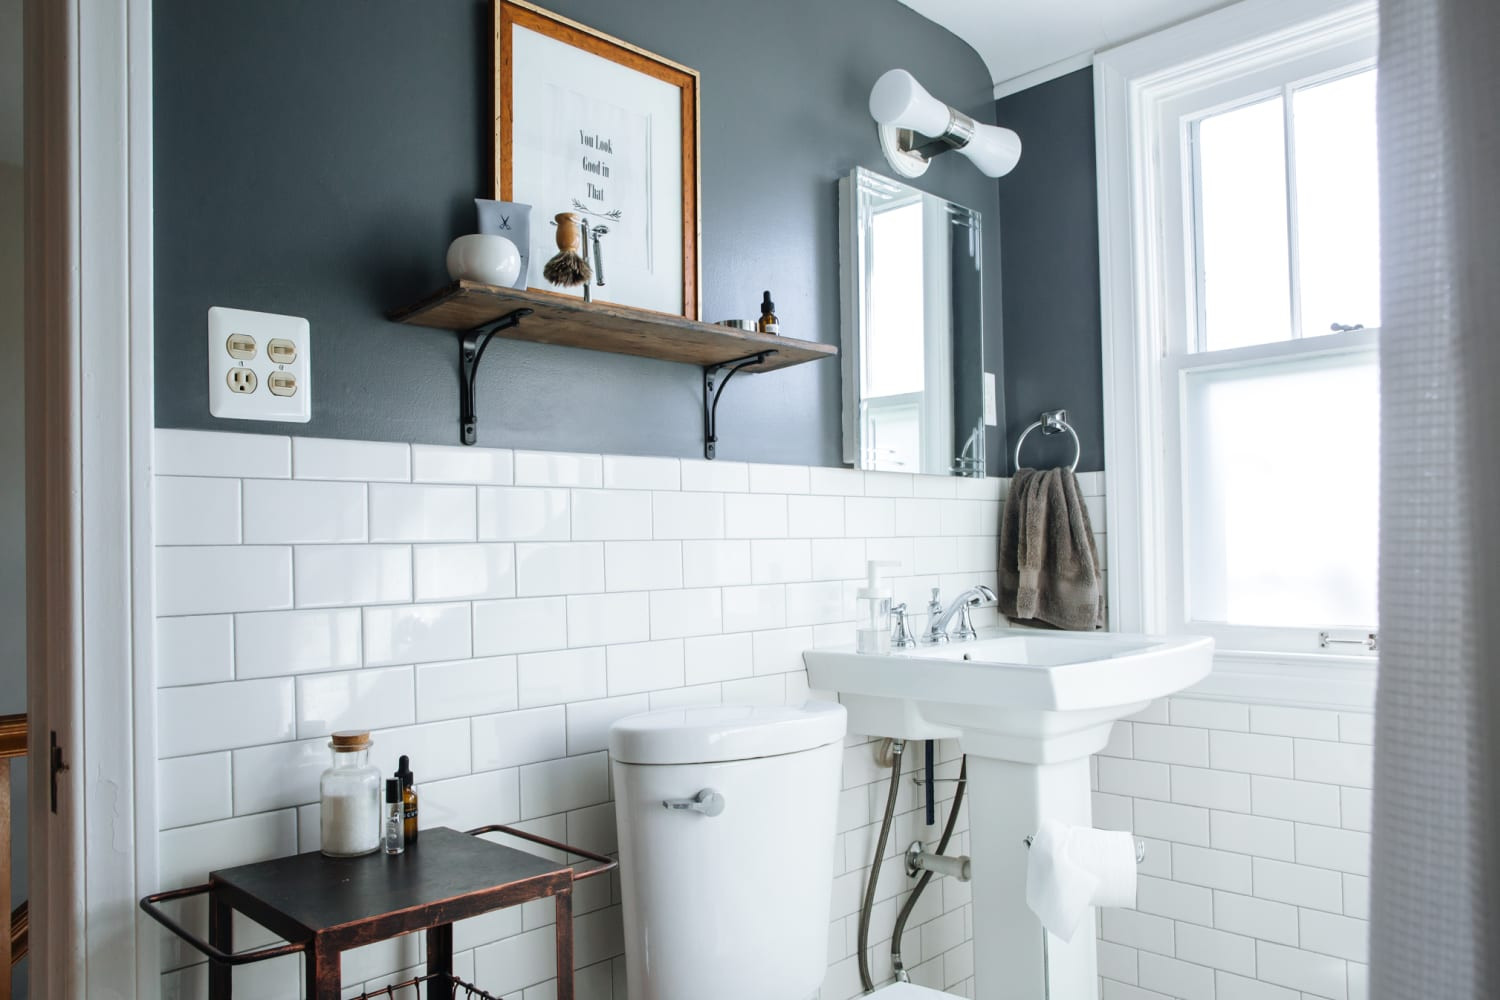 Best Paint Color For Bathroom
 Best Paint Colors for Small Bathrooms